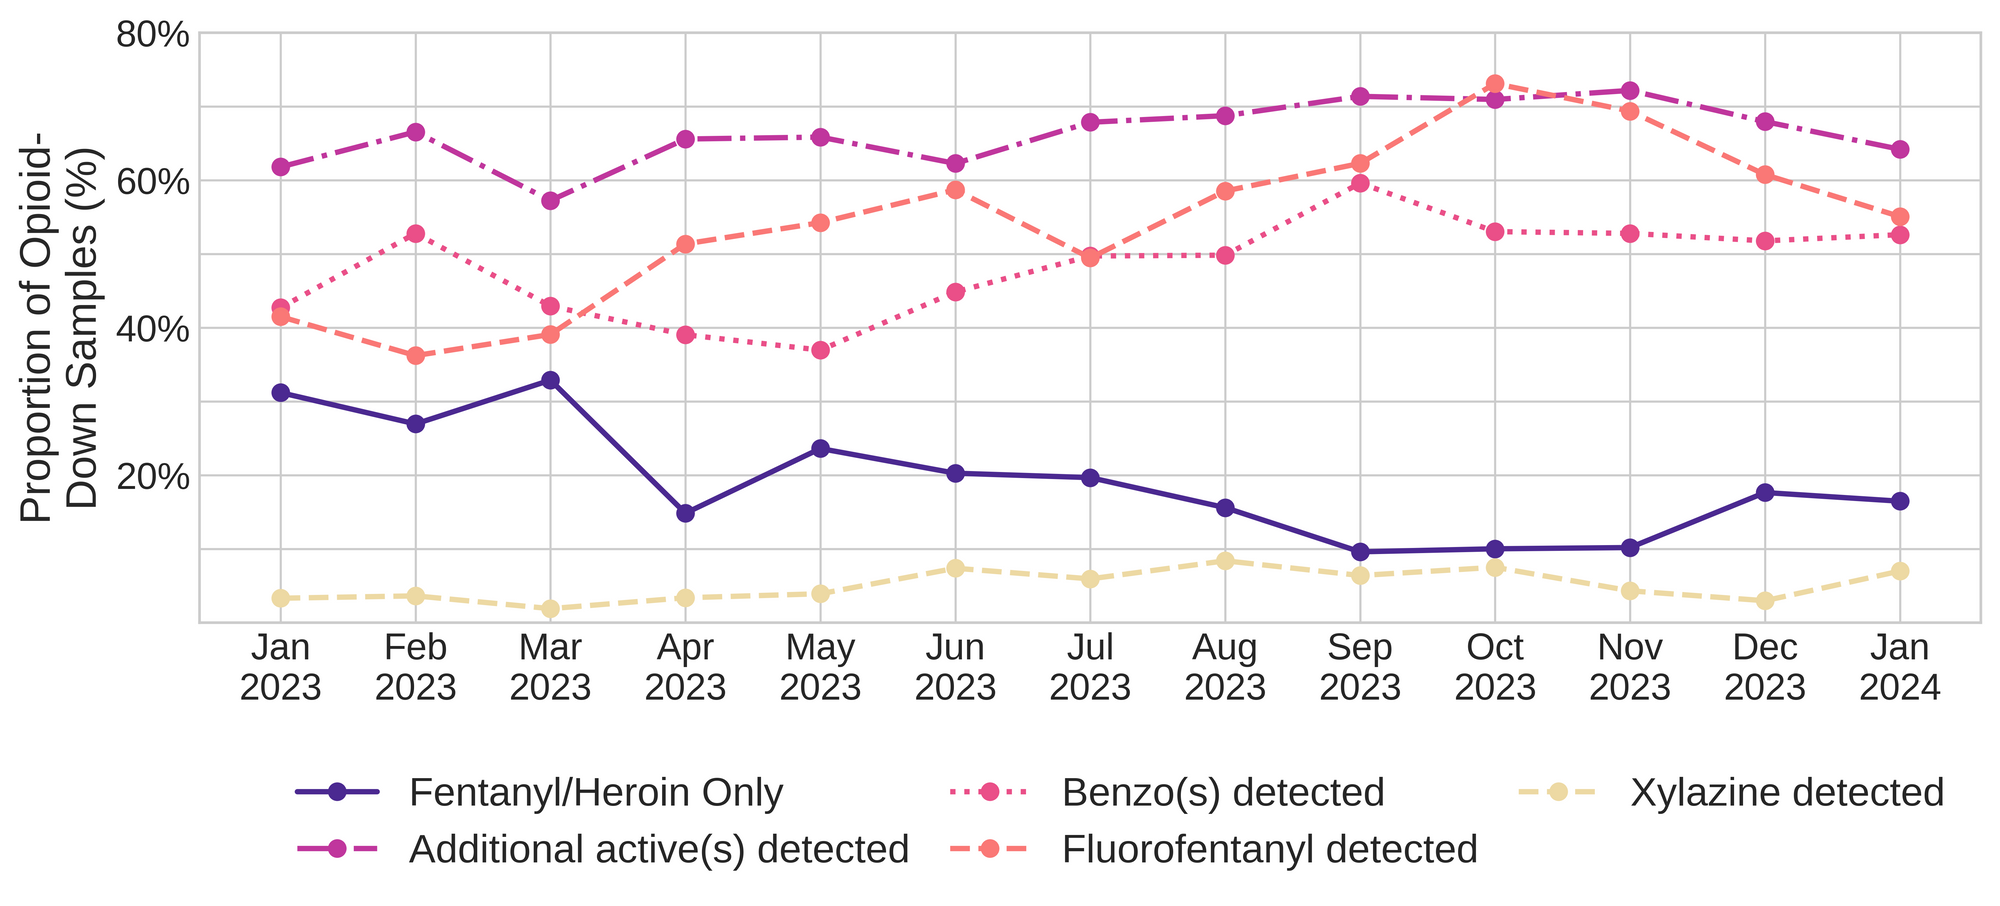 (Figure 3. The percentage of expected opioid-down samples checked between January 2023 and January 2024 that only contained fentanyl/heroin actives (solid dark purple), opioid-down samples with an additional active detected (dot-dashed light purple), opioid-down samples that contained a benzodiazepine-related drug (dotted magenta), opioid-down samples that contained fluorofentanyl (dashed salmon), and opioid-down samples that contained xylazine (dashed yellow).)